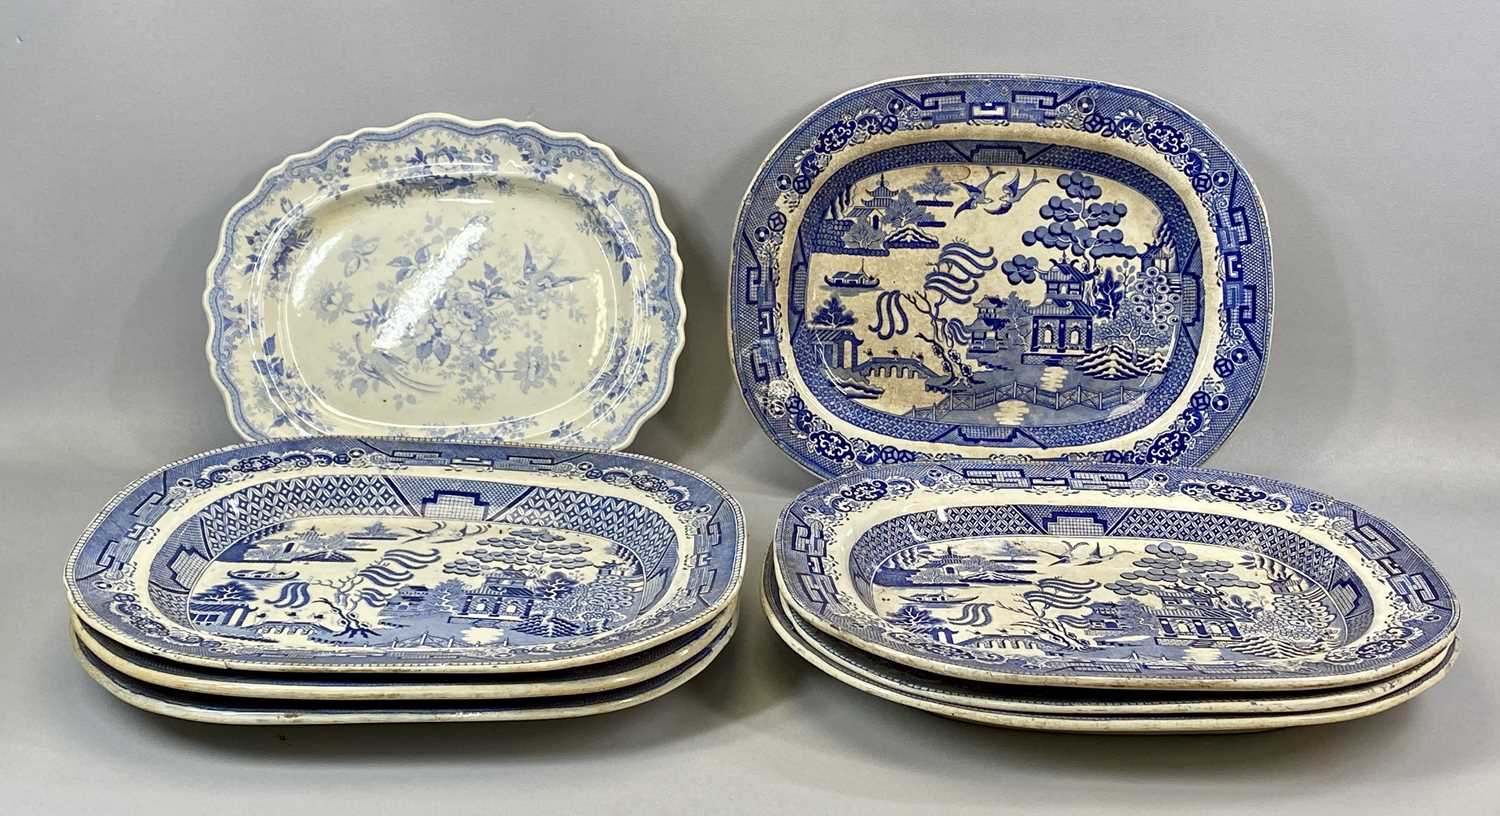 LARGE GROUP OF 19TH CENTURY STAFFORDSHIRE BLUE & WHITE WILLOW PATTERN TABLEWARE, including seven - Image 2 of 3